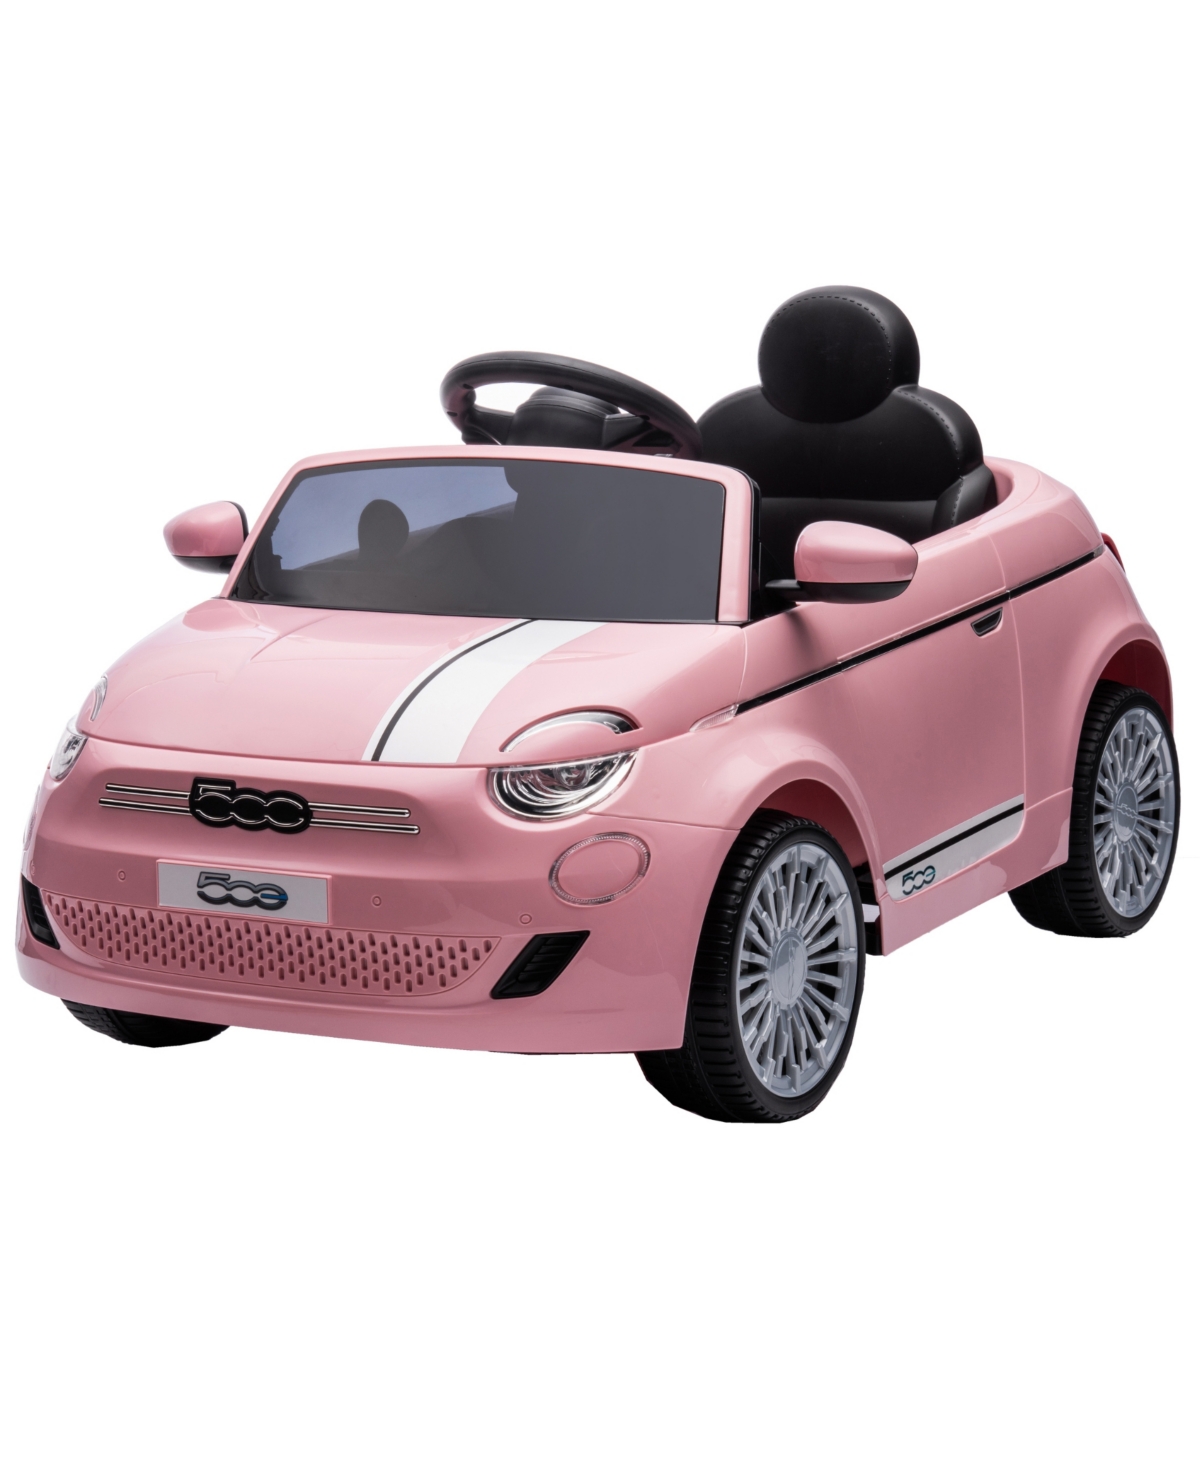 Best Ride On Cars Fiat 500 12v In Pink